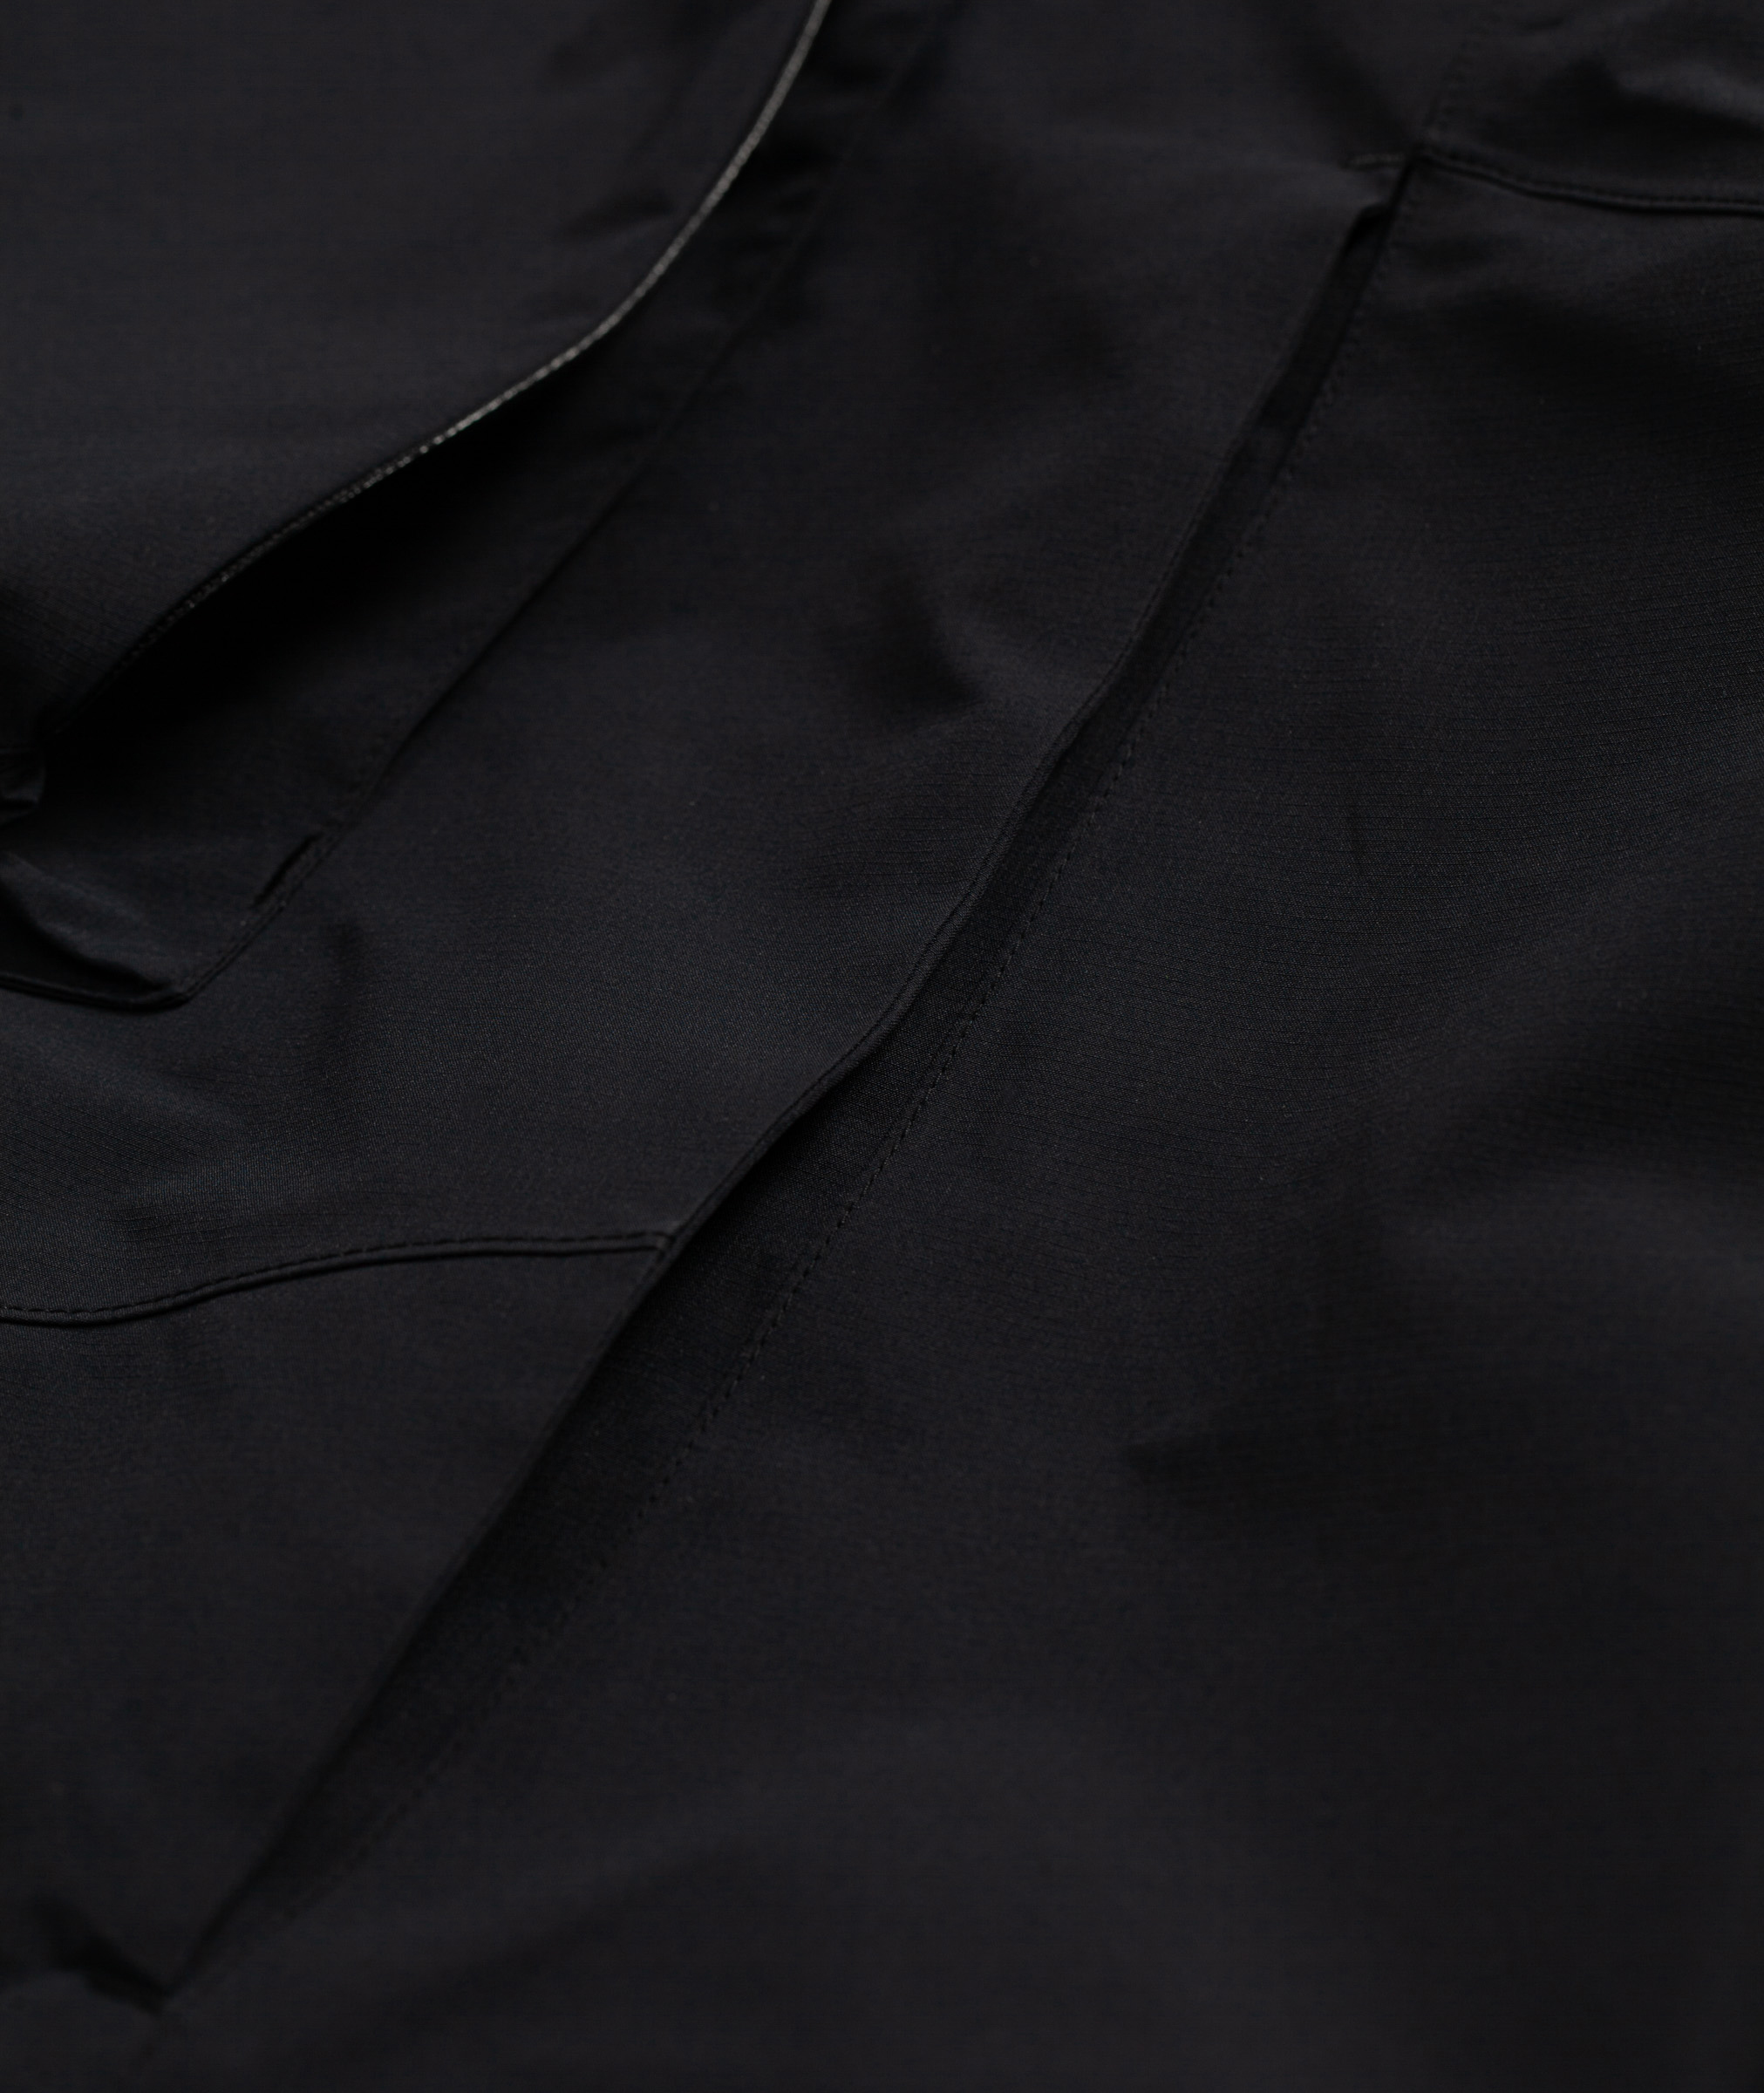 Norse Store | Shipping Worldwide - Acronym J96-GT - Black